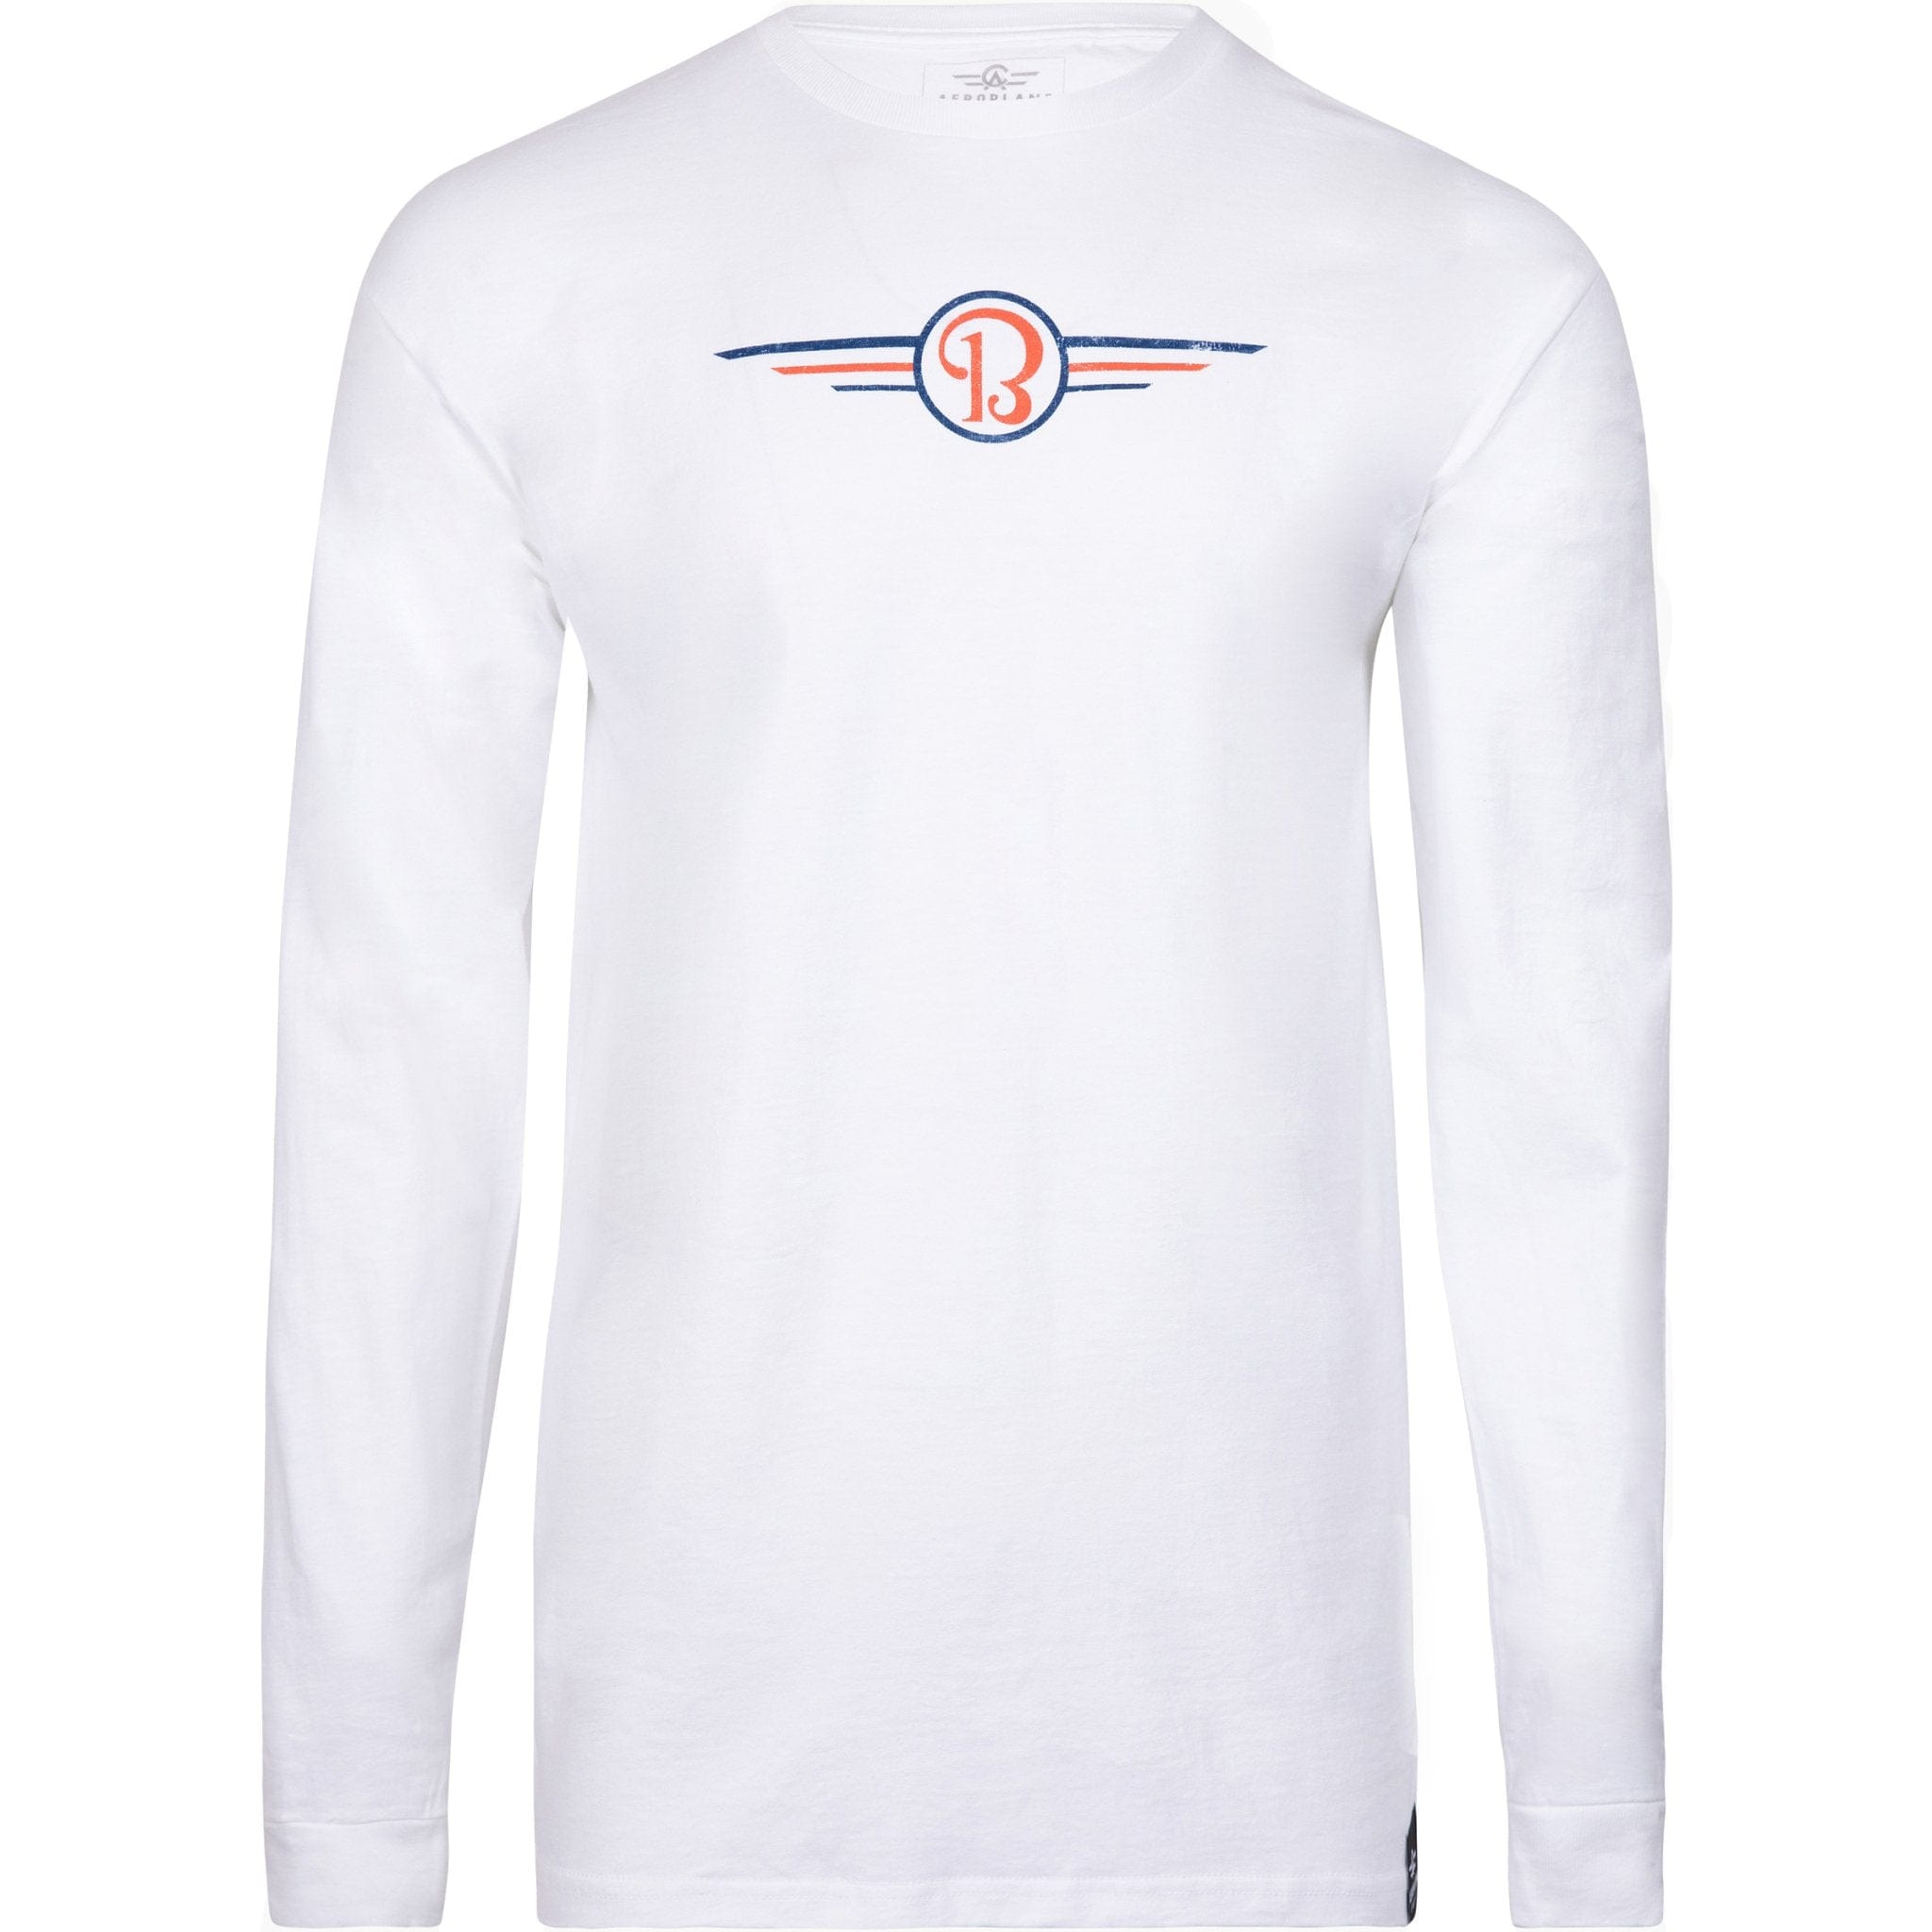 Long Licensed Officially T-Shirt Beechcraft Sleeve Staggerwing